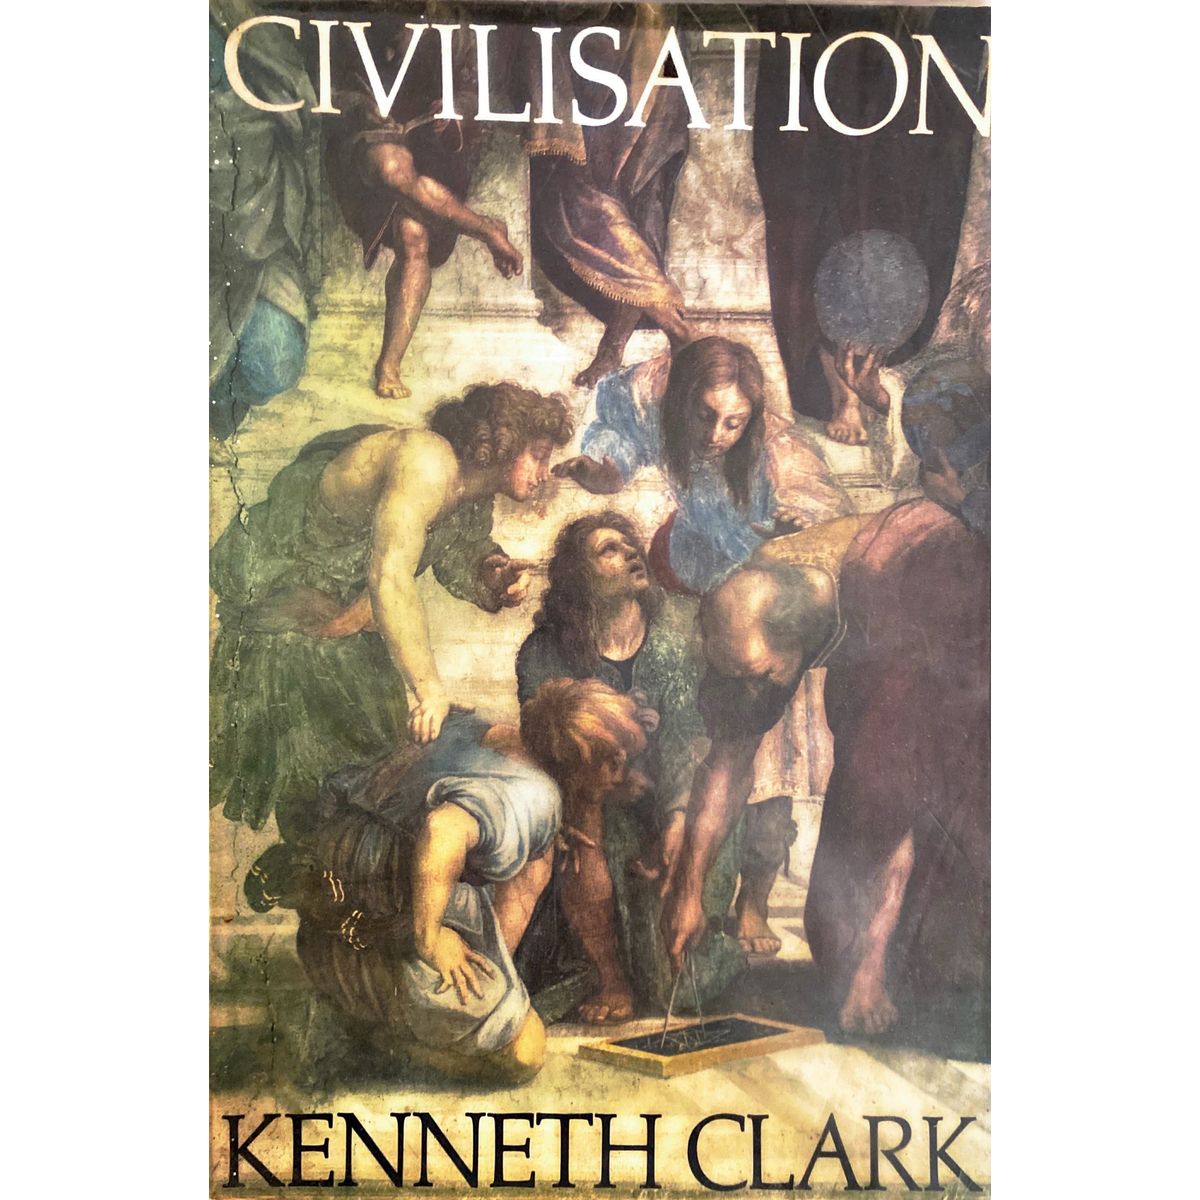 ISBN: 9780719522406 / 0719522404 - Civilisation: A Personal View by Kenneth Clarke [1991]